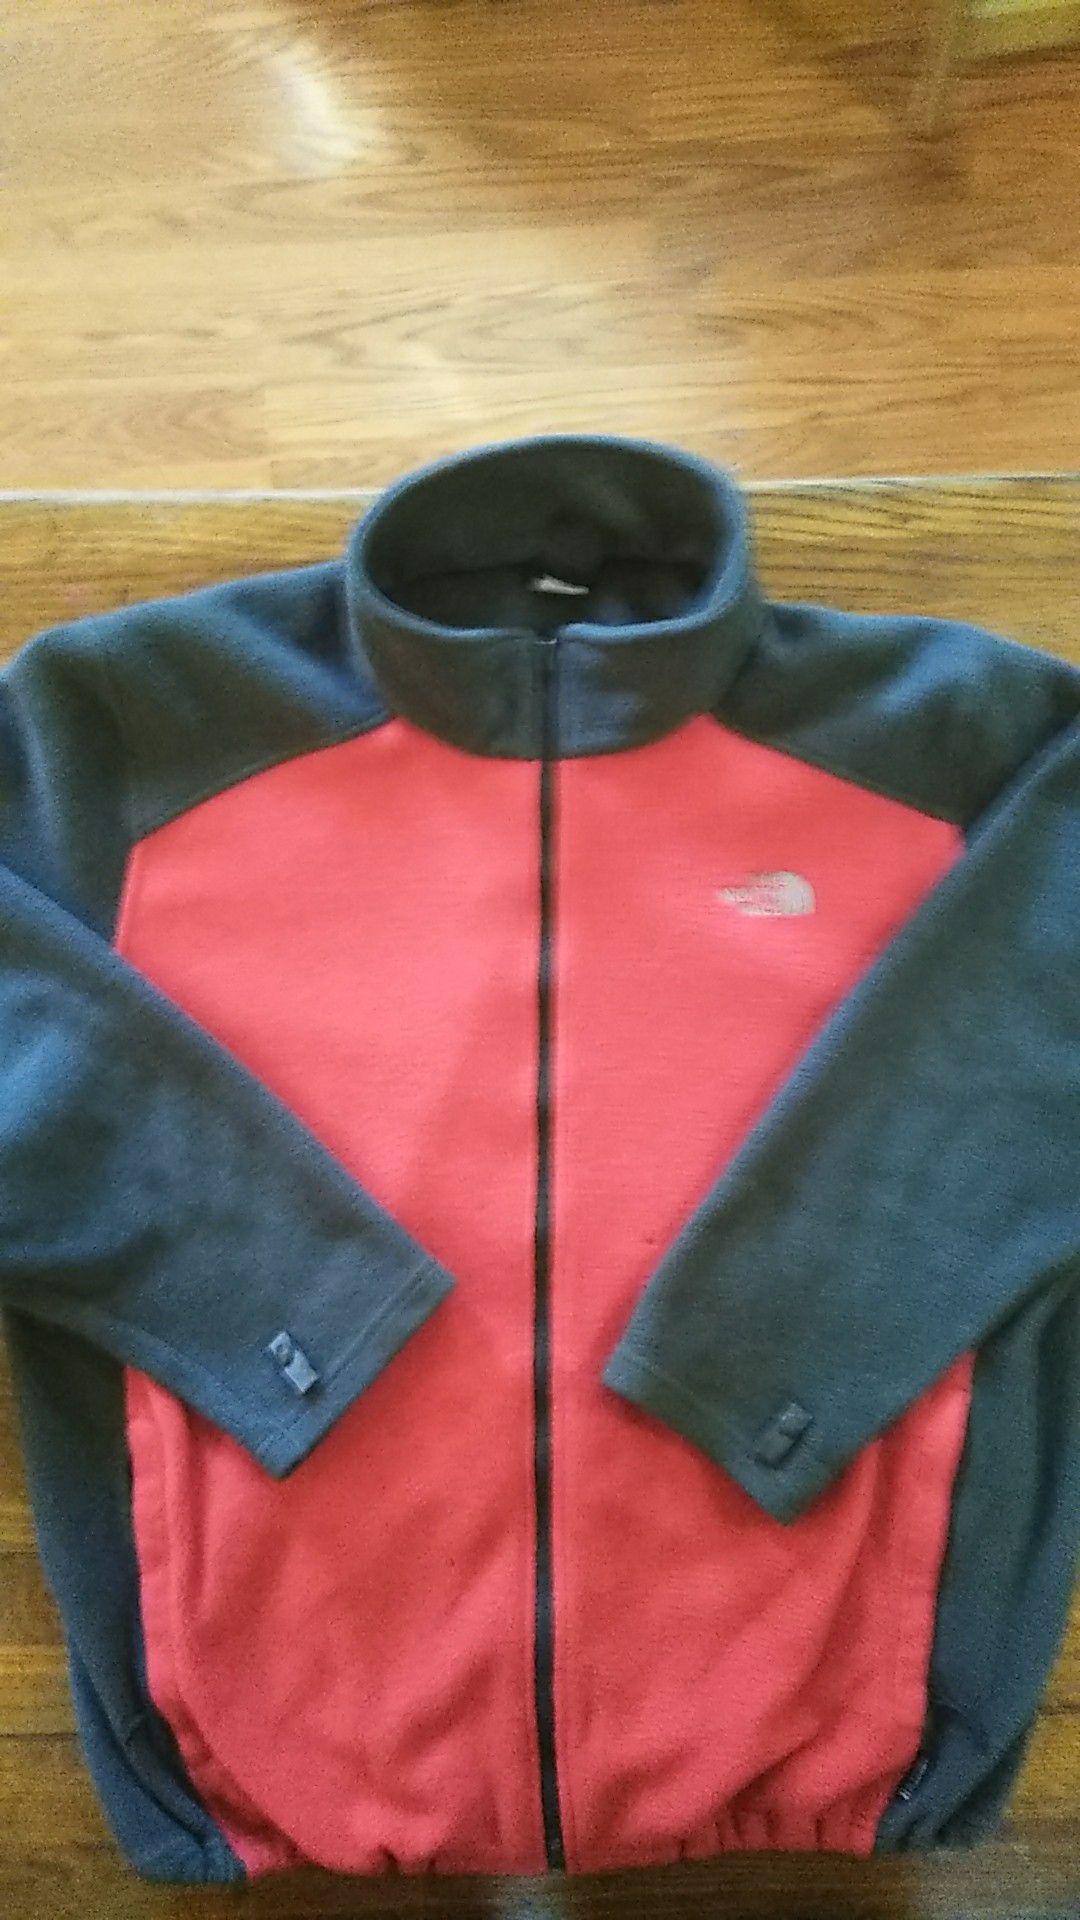 XXL North Face jacket for cheap!